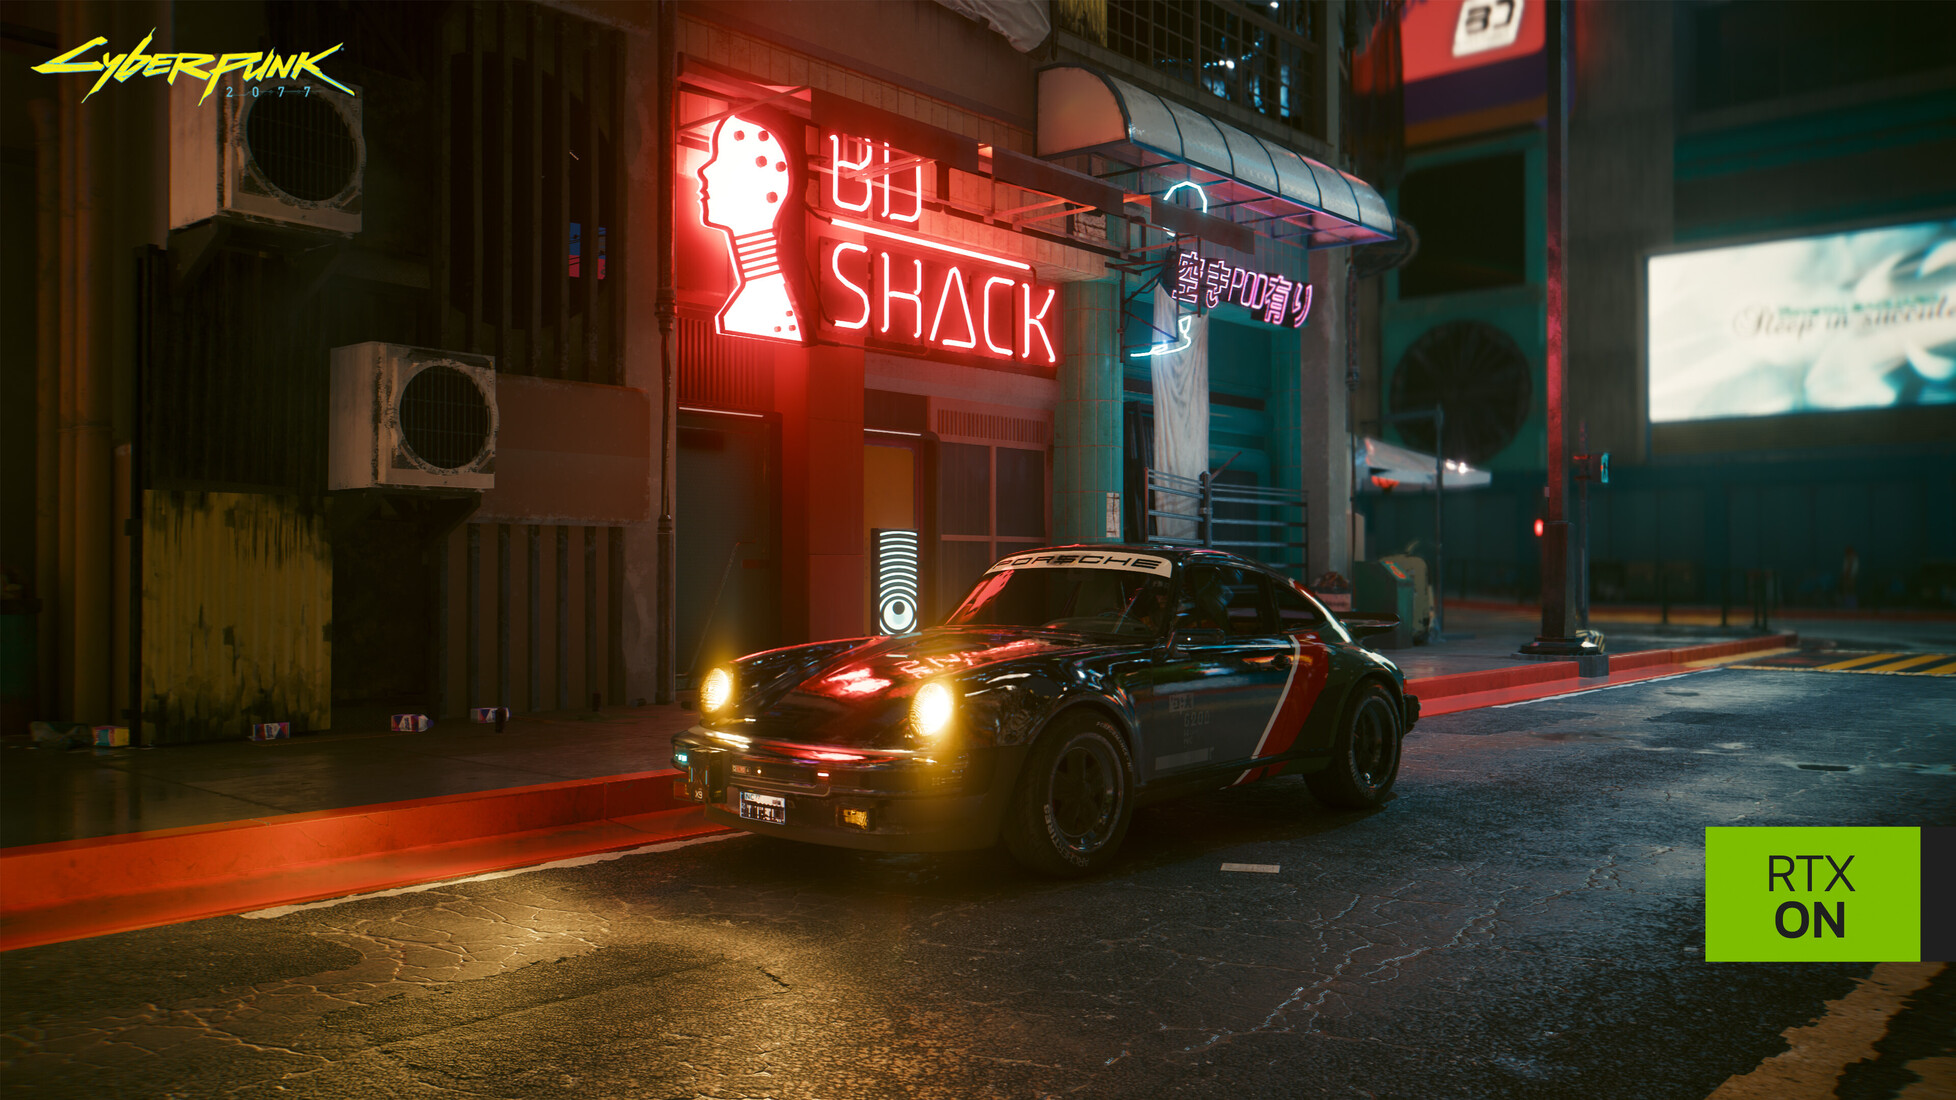 SPLACE  Cyberpunk 2077 Previews Ray Tracing: Overdrive Mode